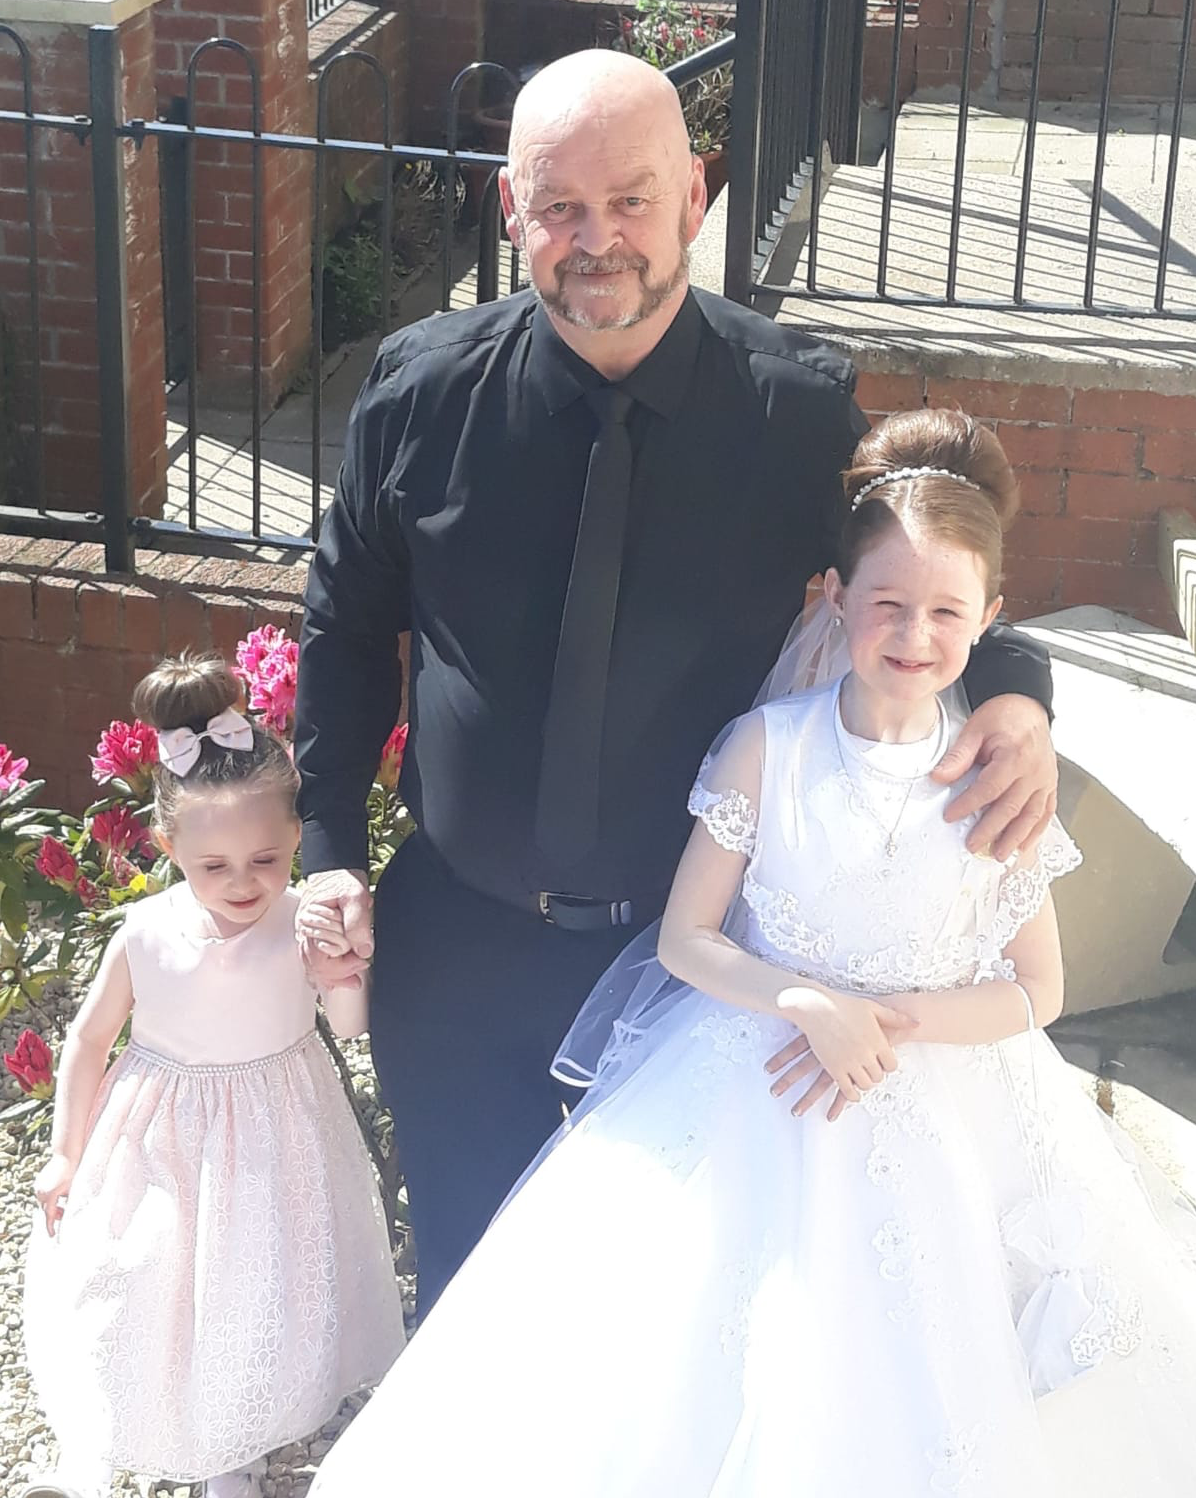 SLAIN: Kieran Wylie with granddaughters Maddison and Mya, who was celebrating her First Holy Communion. (Photo with kind permission of the Wylie family.)